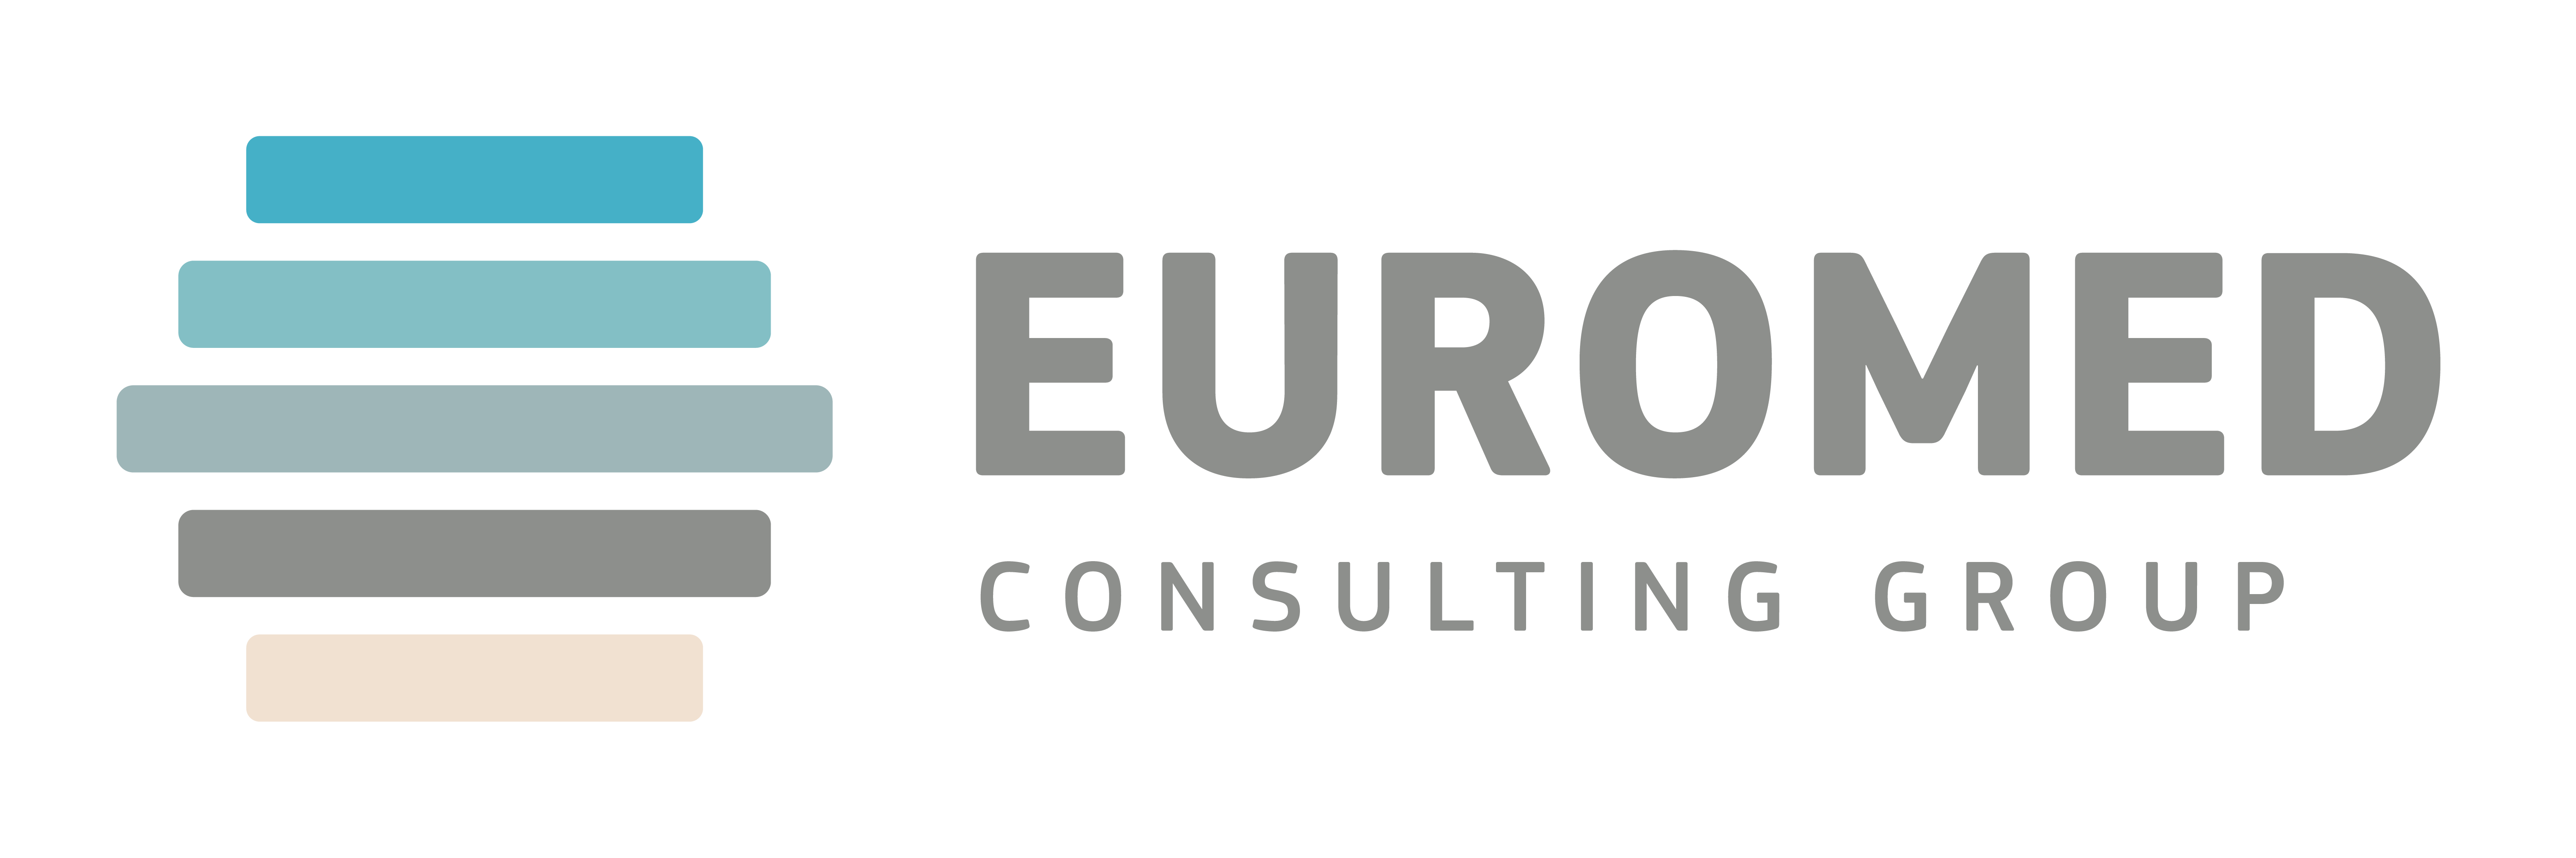 Euromed Consulting Group